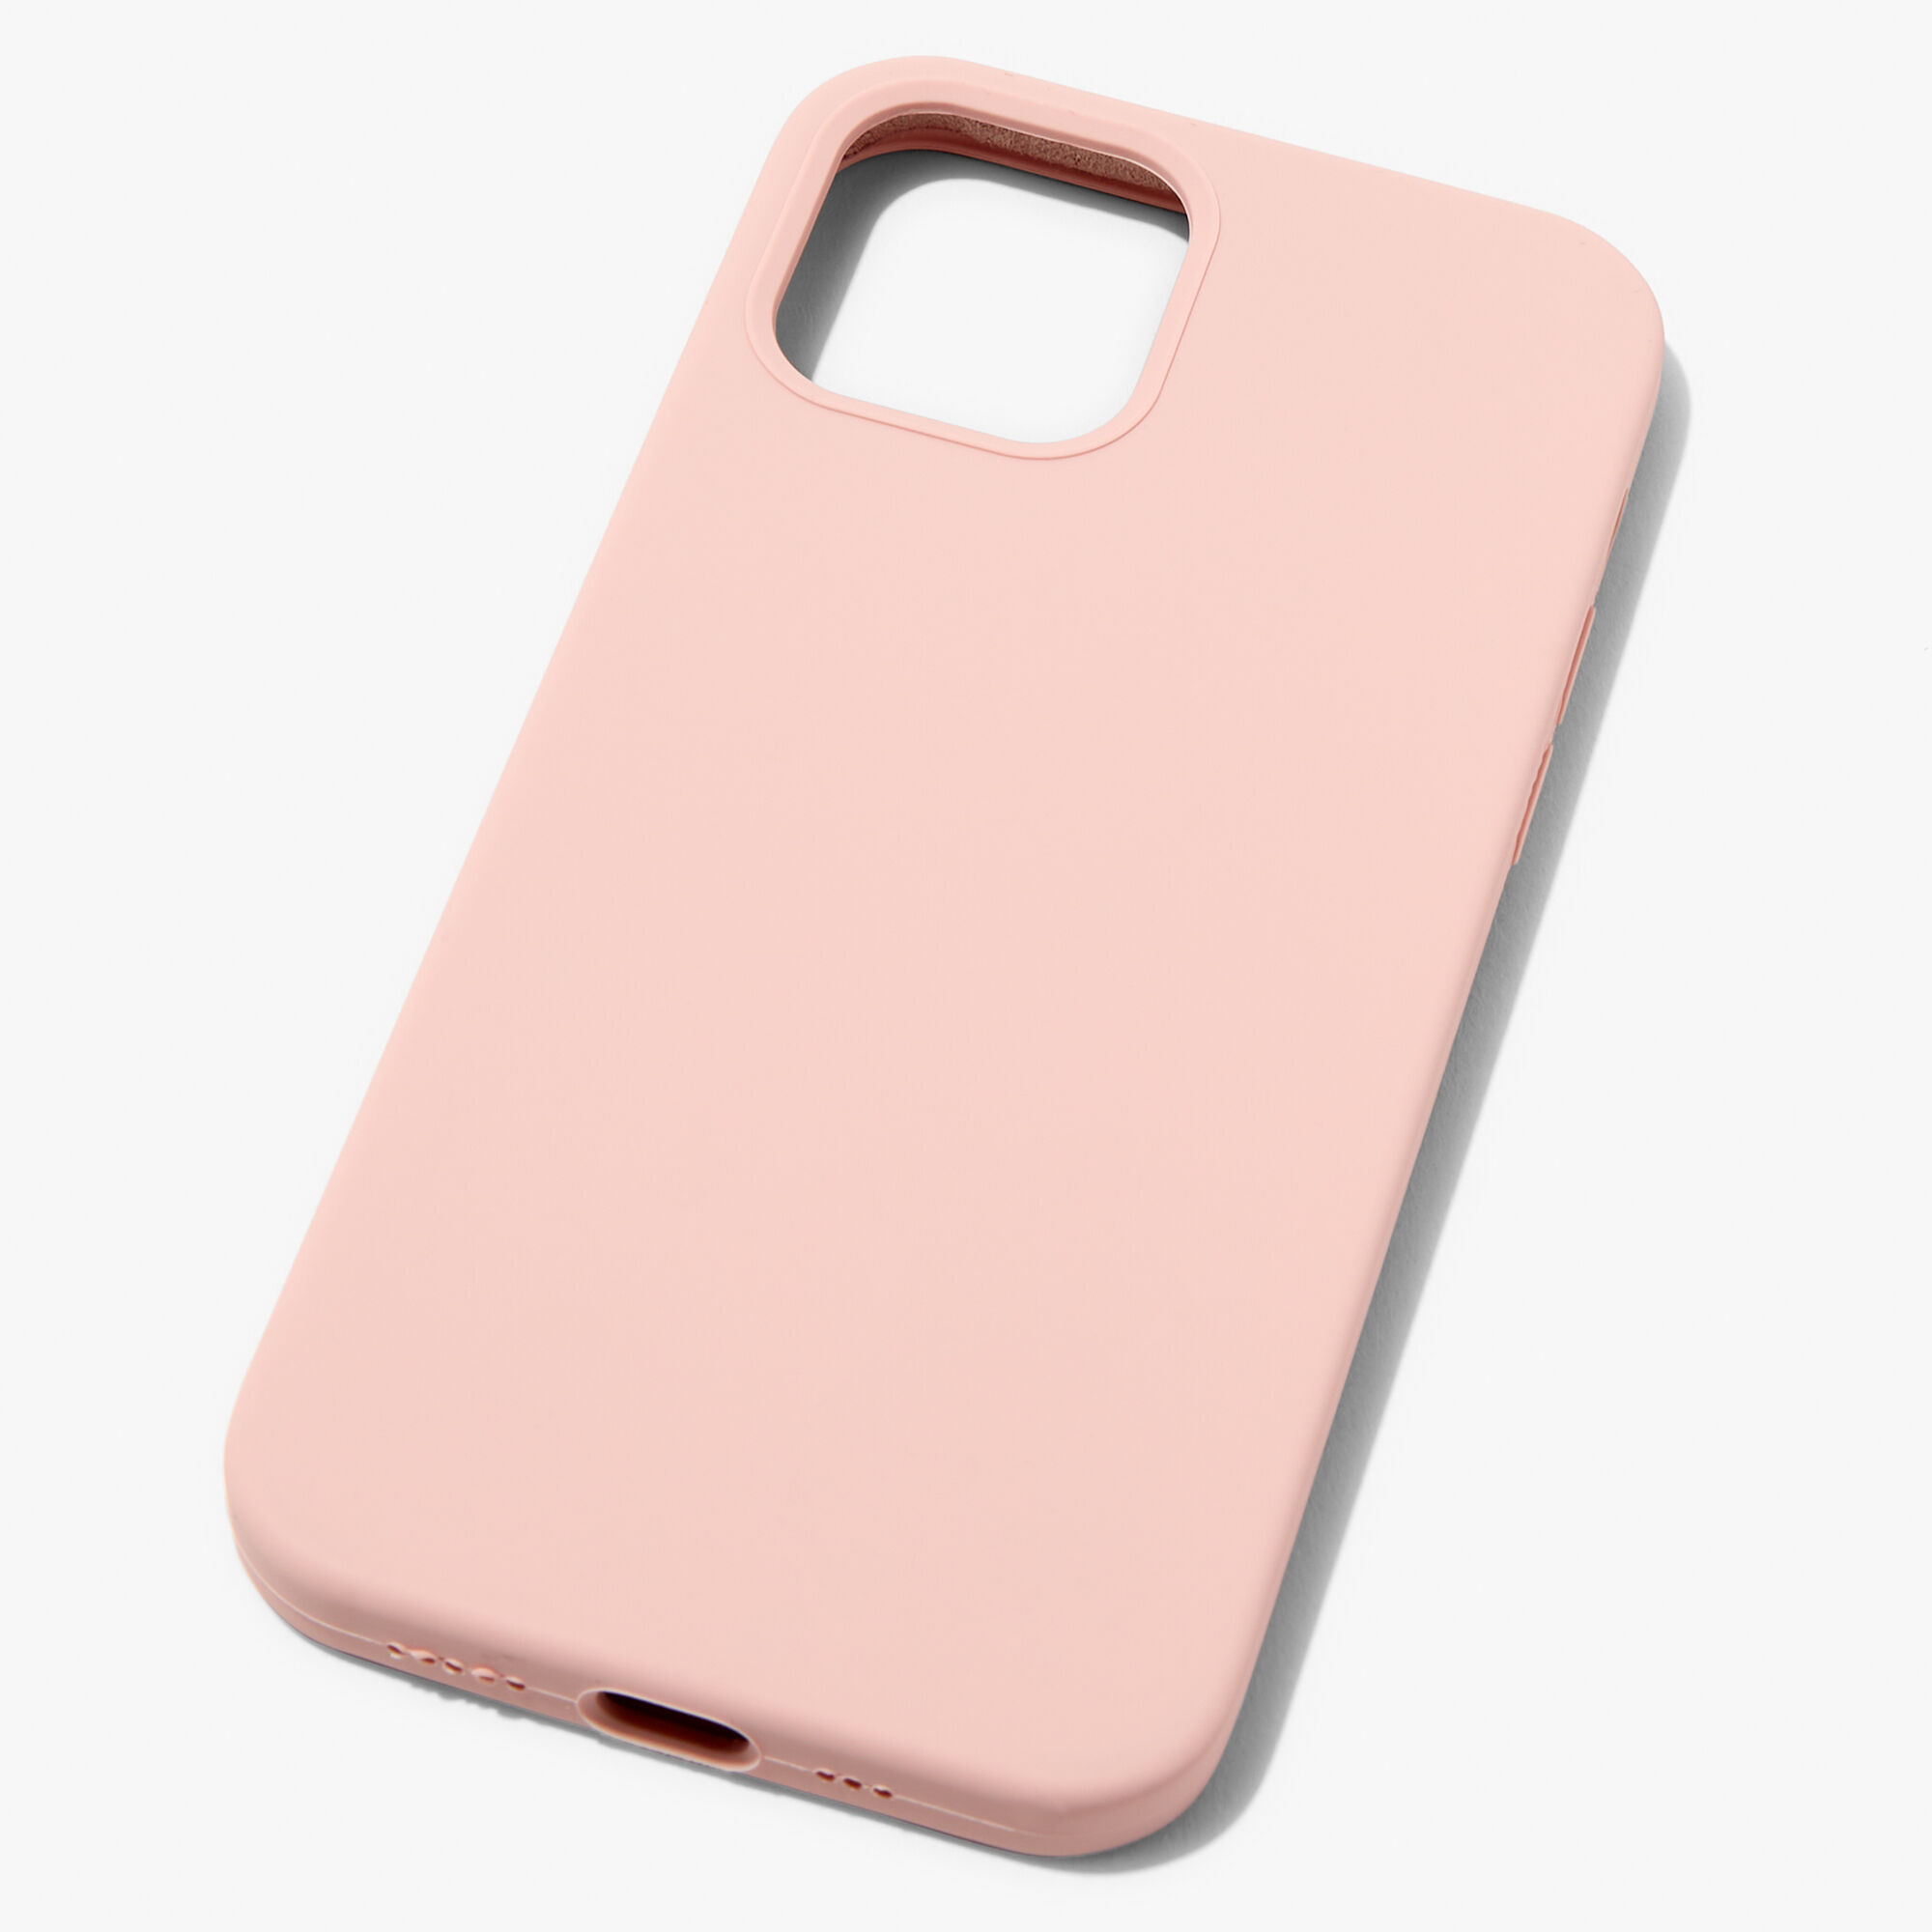 View Claires Solid Blush Silicone Phone Case Fits Iphone 12 Pro Pink information